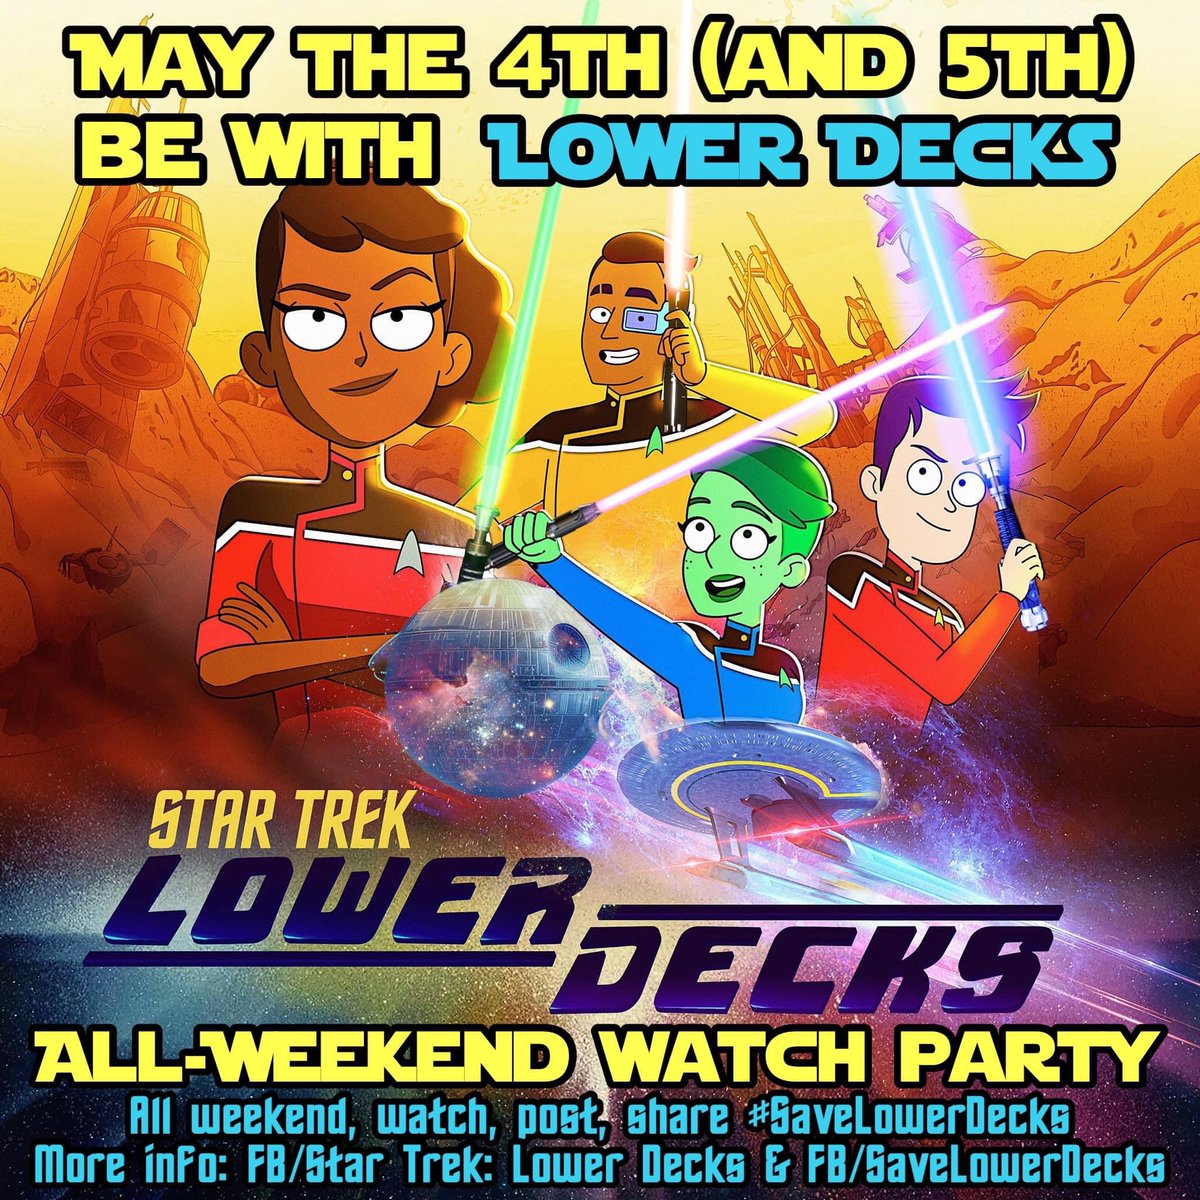 Hello #StarTrek friends, it’s time for our #LowerDecksWatchParty where you stream (preferably!) Star Trek Lower Decks to boost viewership of this show we love so much! Like Dr. Migleemo says: #Maythe4thBeWithYou Wait wrong franchise, sorry! #SaveLowerDecks #LowerDecks